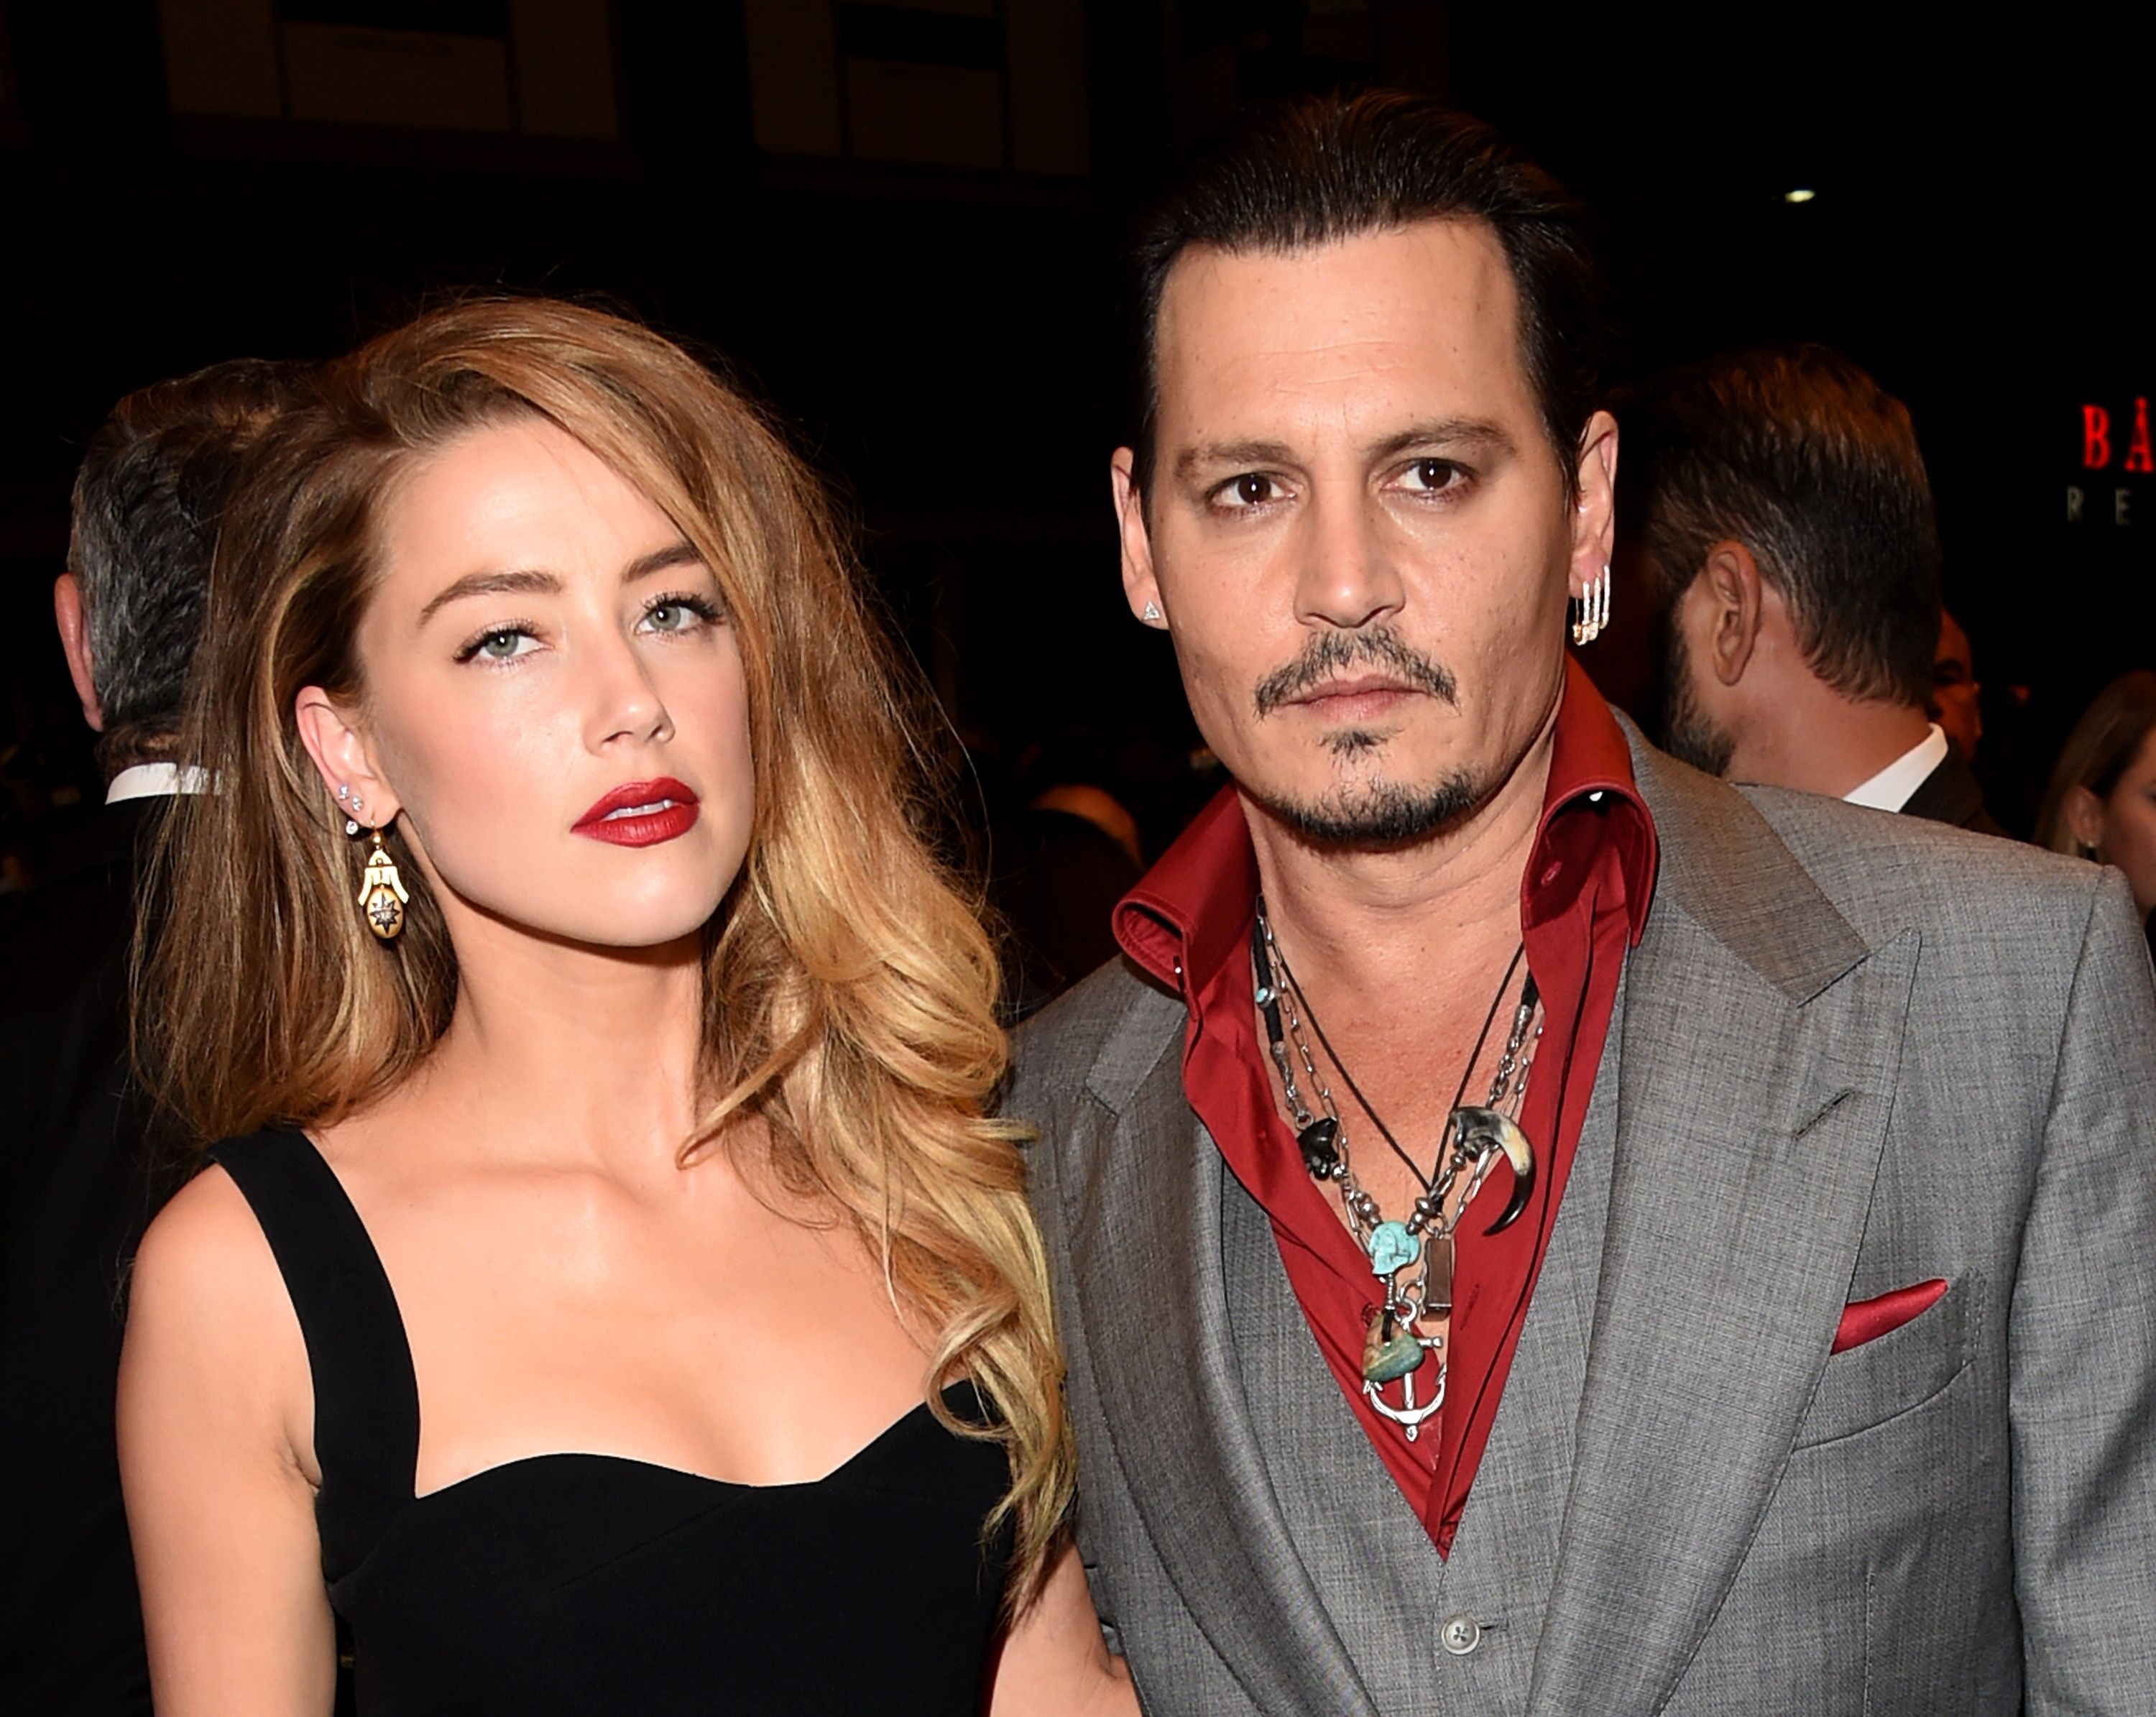 Amber Heard and Johnny Depp during the "Black Mass" premiere at the 2015 Toronto International Film Festival at The Elgin on September 14, 2015 in Toronto, Canada. | Source: Getty Images